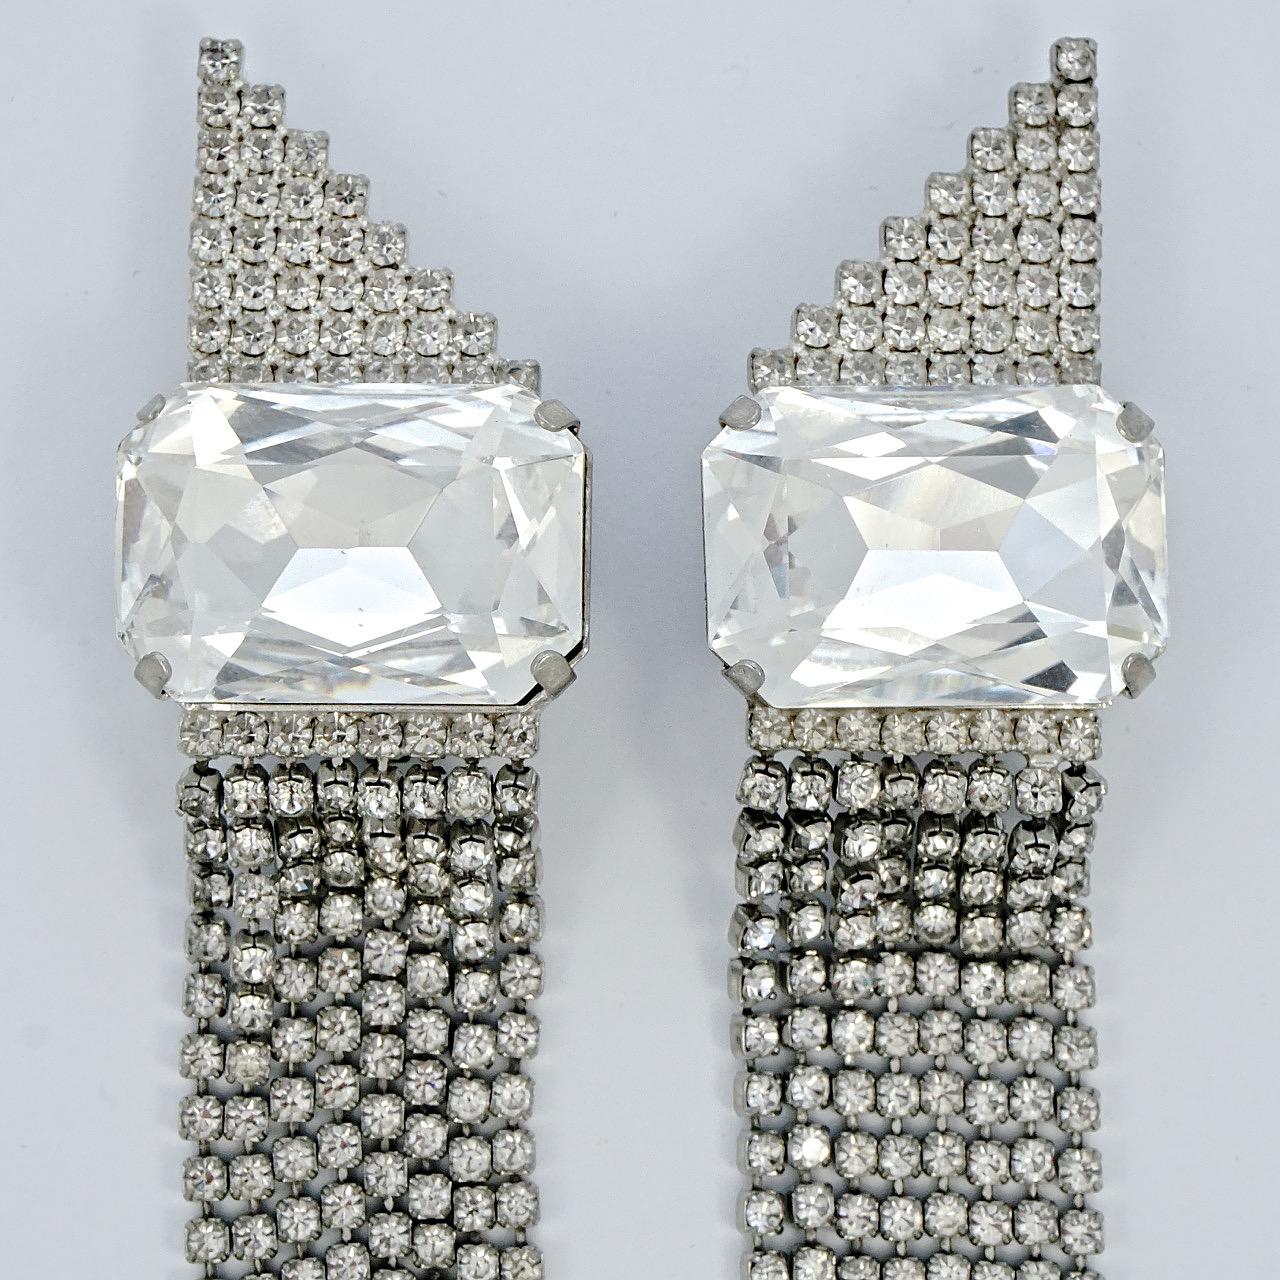 Fabulous silver tone chandelier clip on earrings, with eight strands of sparkling clear rhinestones dropping from a large single rhinestone. Measuring length 13.8cm / 5.4 inches, and the single rhinestone is 2.7cm / 1 inch by 1.8cm / .7 inch. There